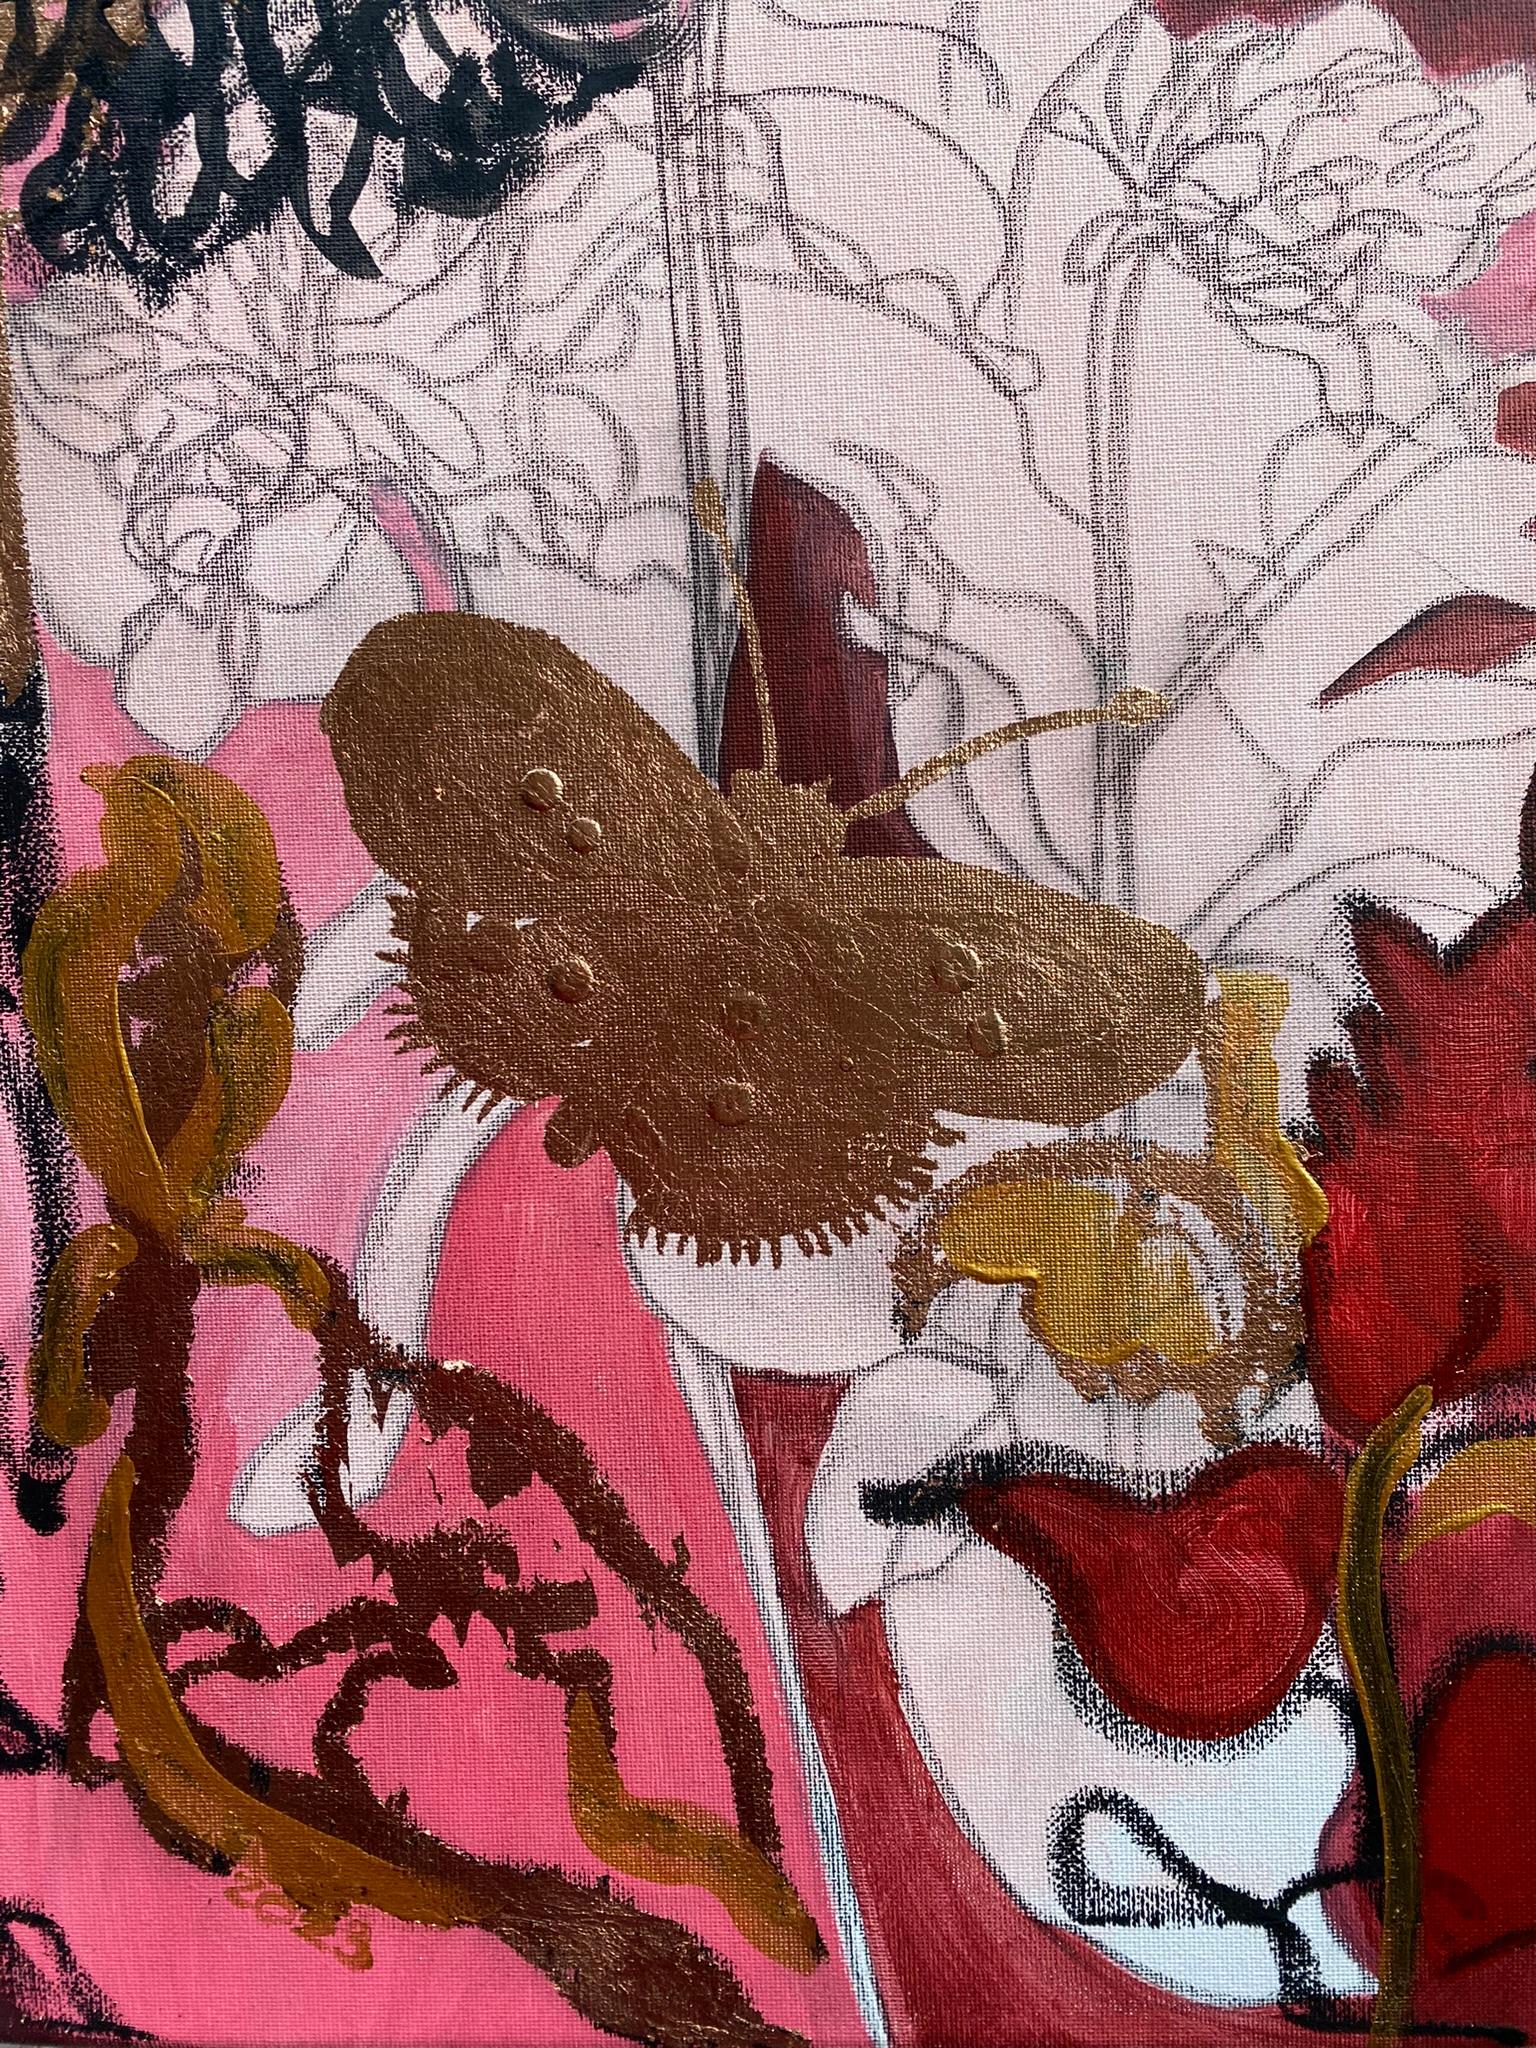 Original-Red Dahlias+Butterfly-Expression-Abstract-Gold leaf-UK Awarded Artist 11